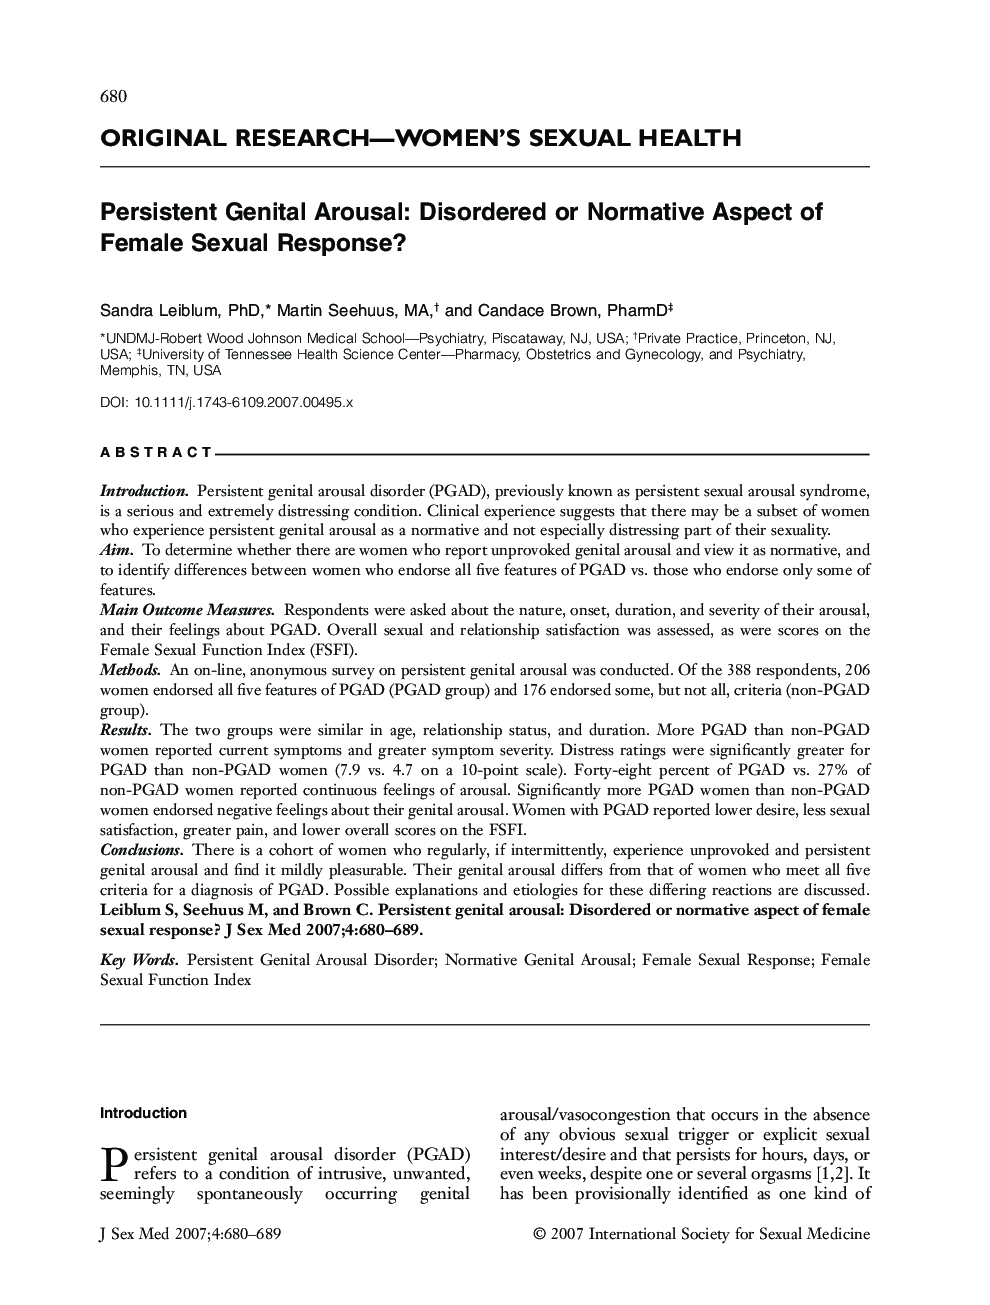 ORIGINAL RESEARCH-WOMEN'S SEXUAL HEALTH: Persistent Genital Arousal: Disordered or Normative Aspect of Female Sexual Response?